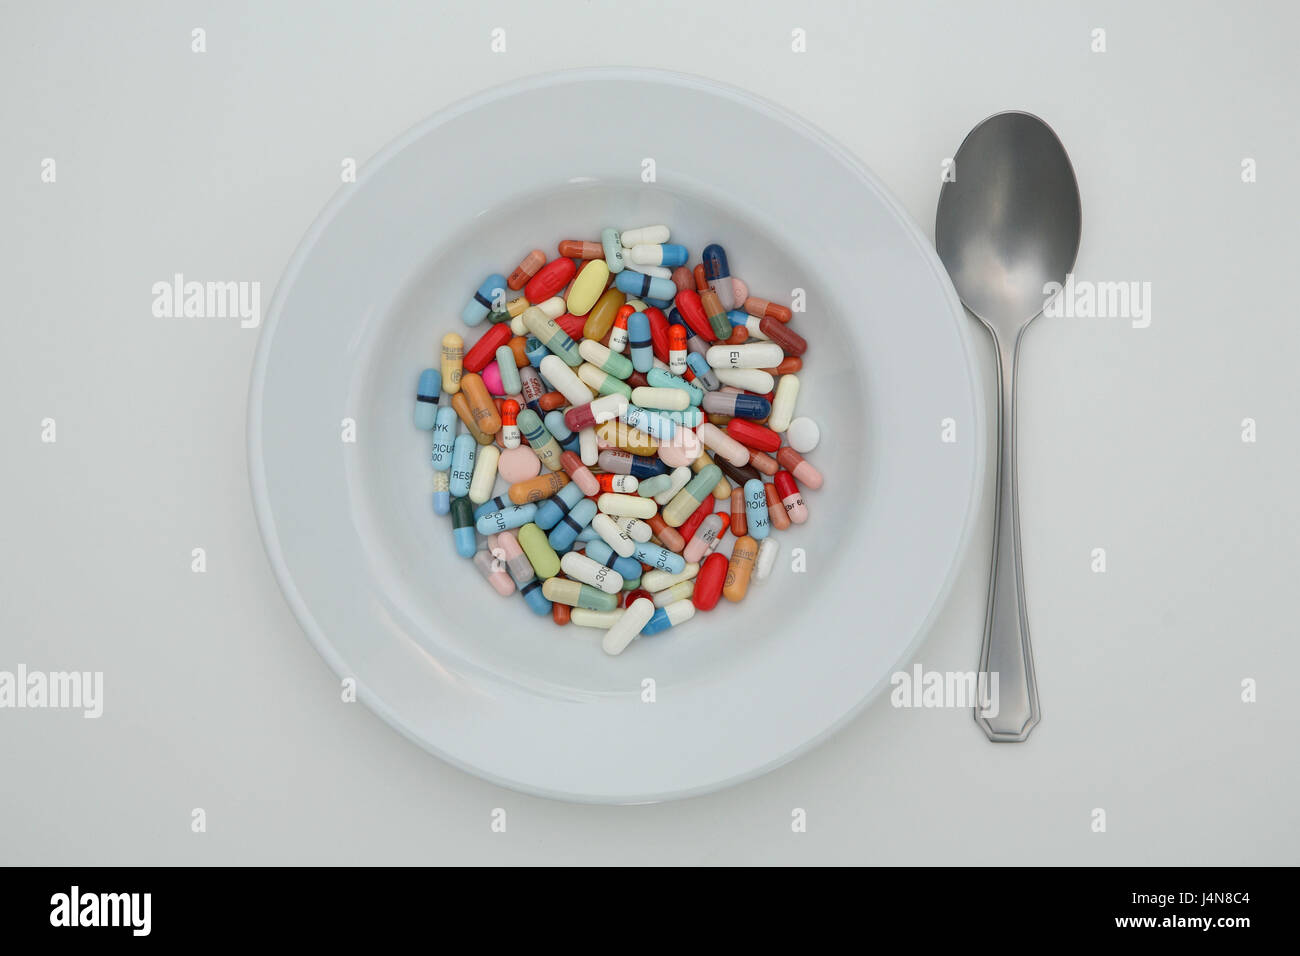 Drugs, plates, tablets, capsules, spoon, Stock Photo